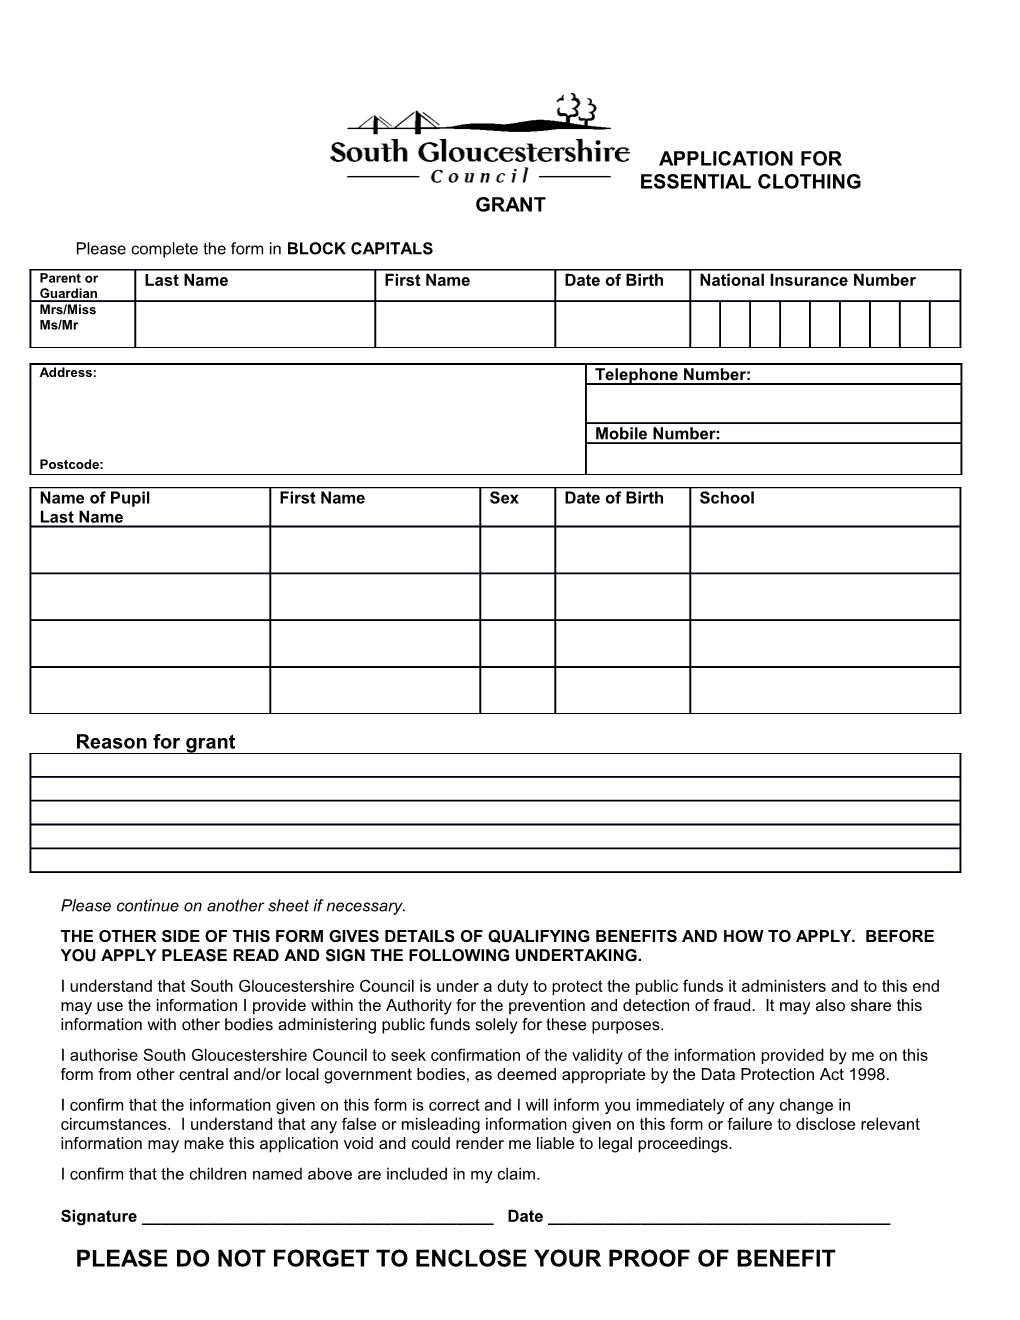 Application for Essential Clothing Grant